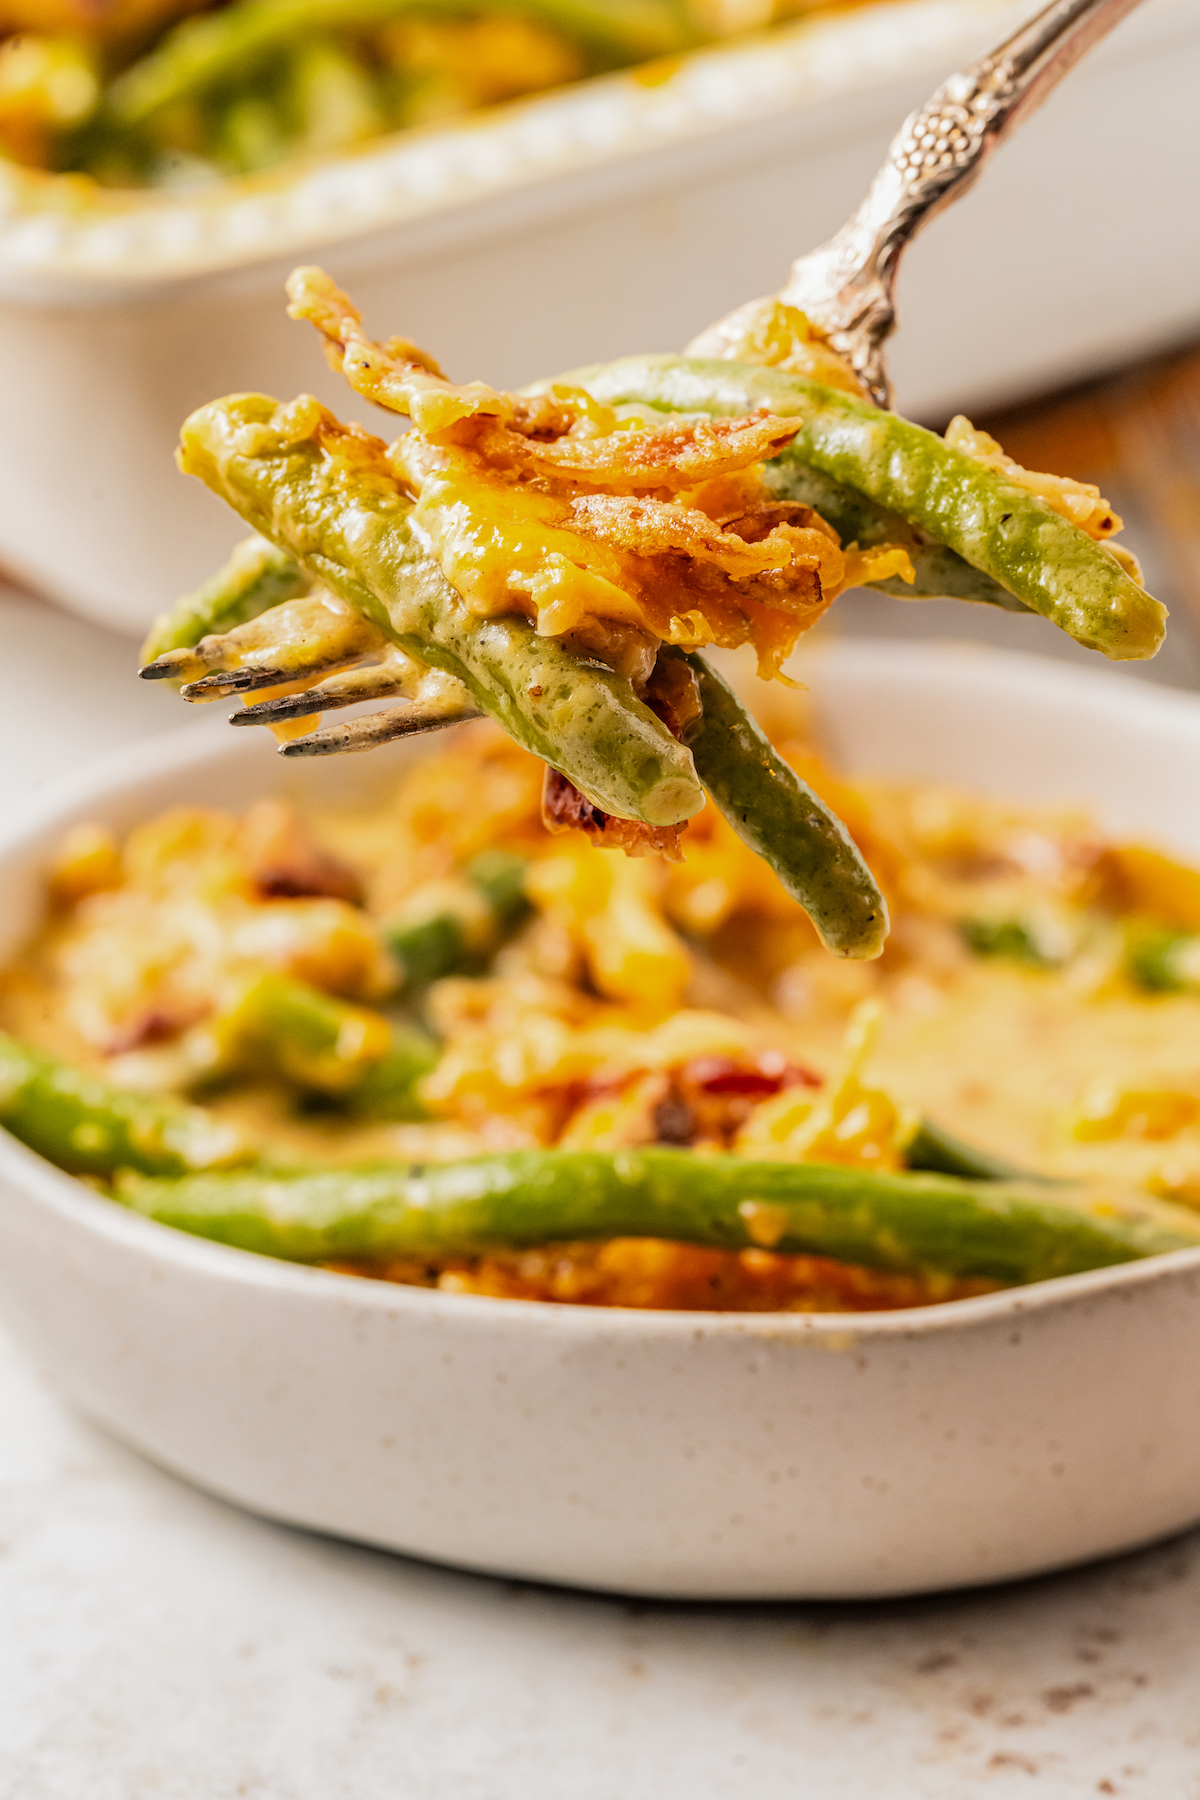 Lifting a forkful of cheesy green bean casserole toward the camera.